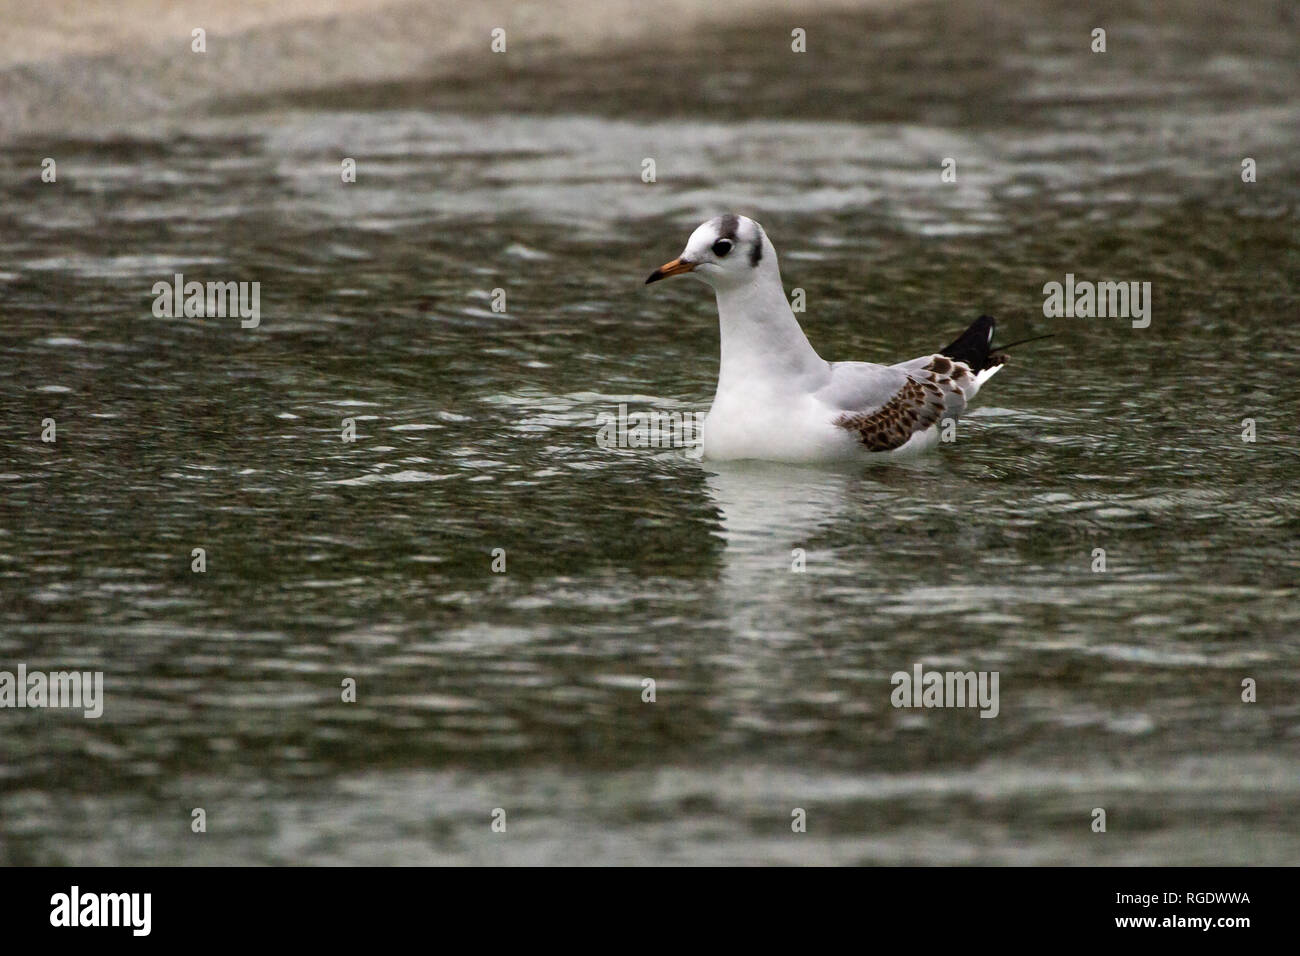 Black-Headed Gull (Chroicocephalus ridibundus) in the waters of the Diana Memorial Fountain located in London's Hyde Park, UK Stock Photo